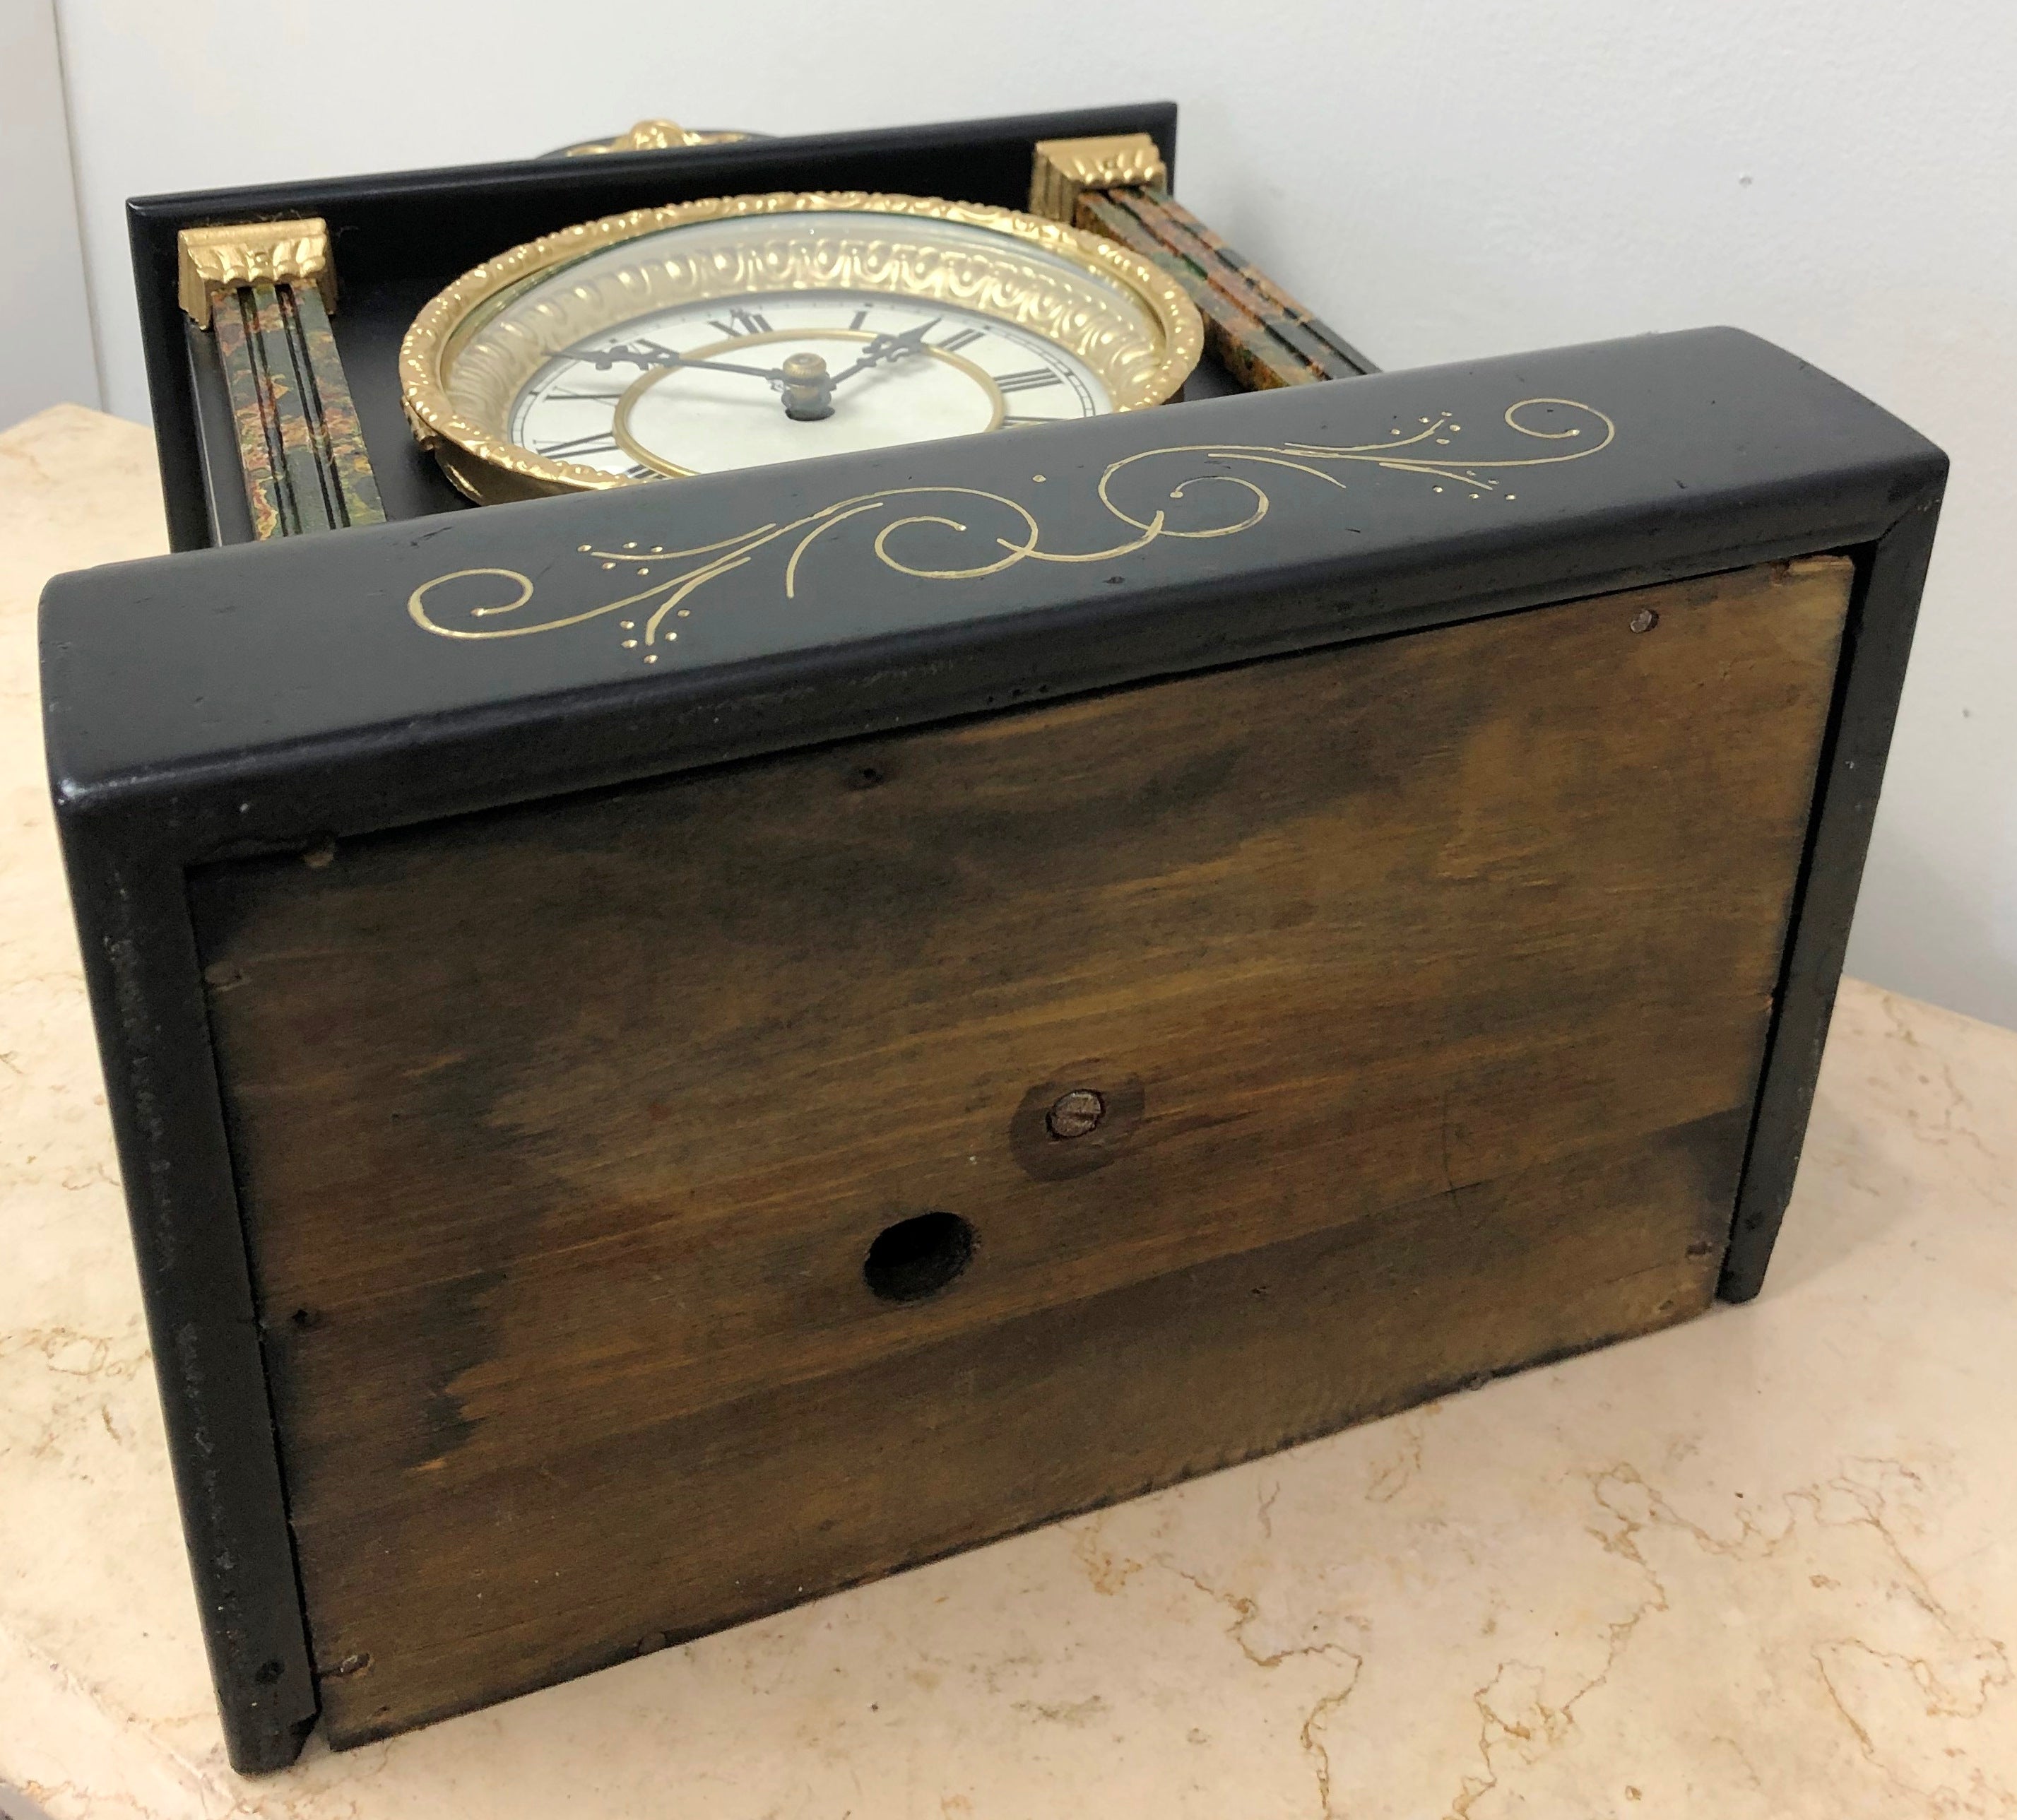 Antique Waterbury Bell & Hammer on Coil Chime Mantel Clock | eXibit collection